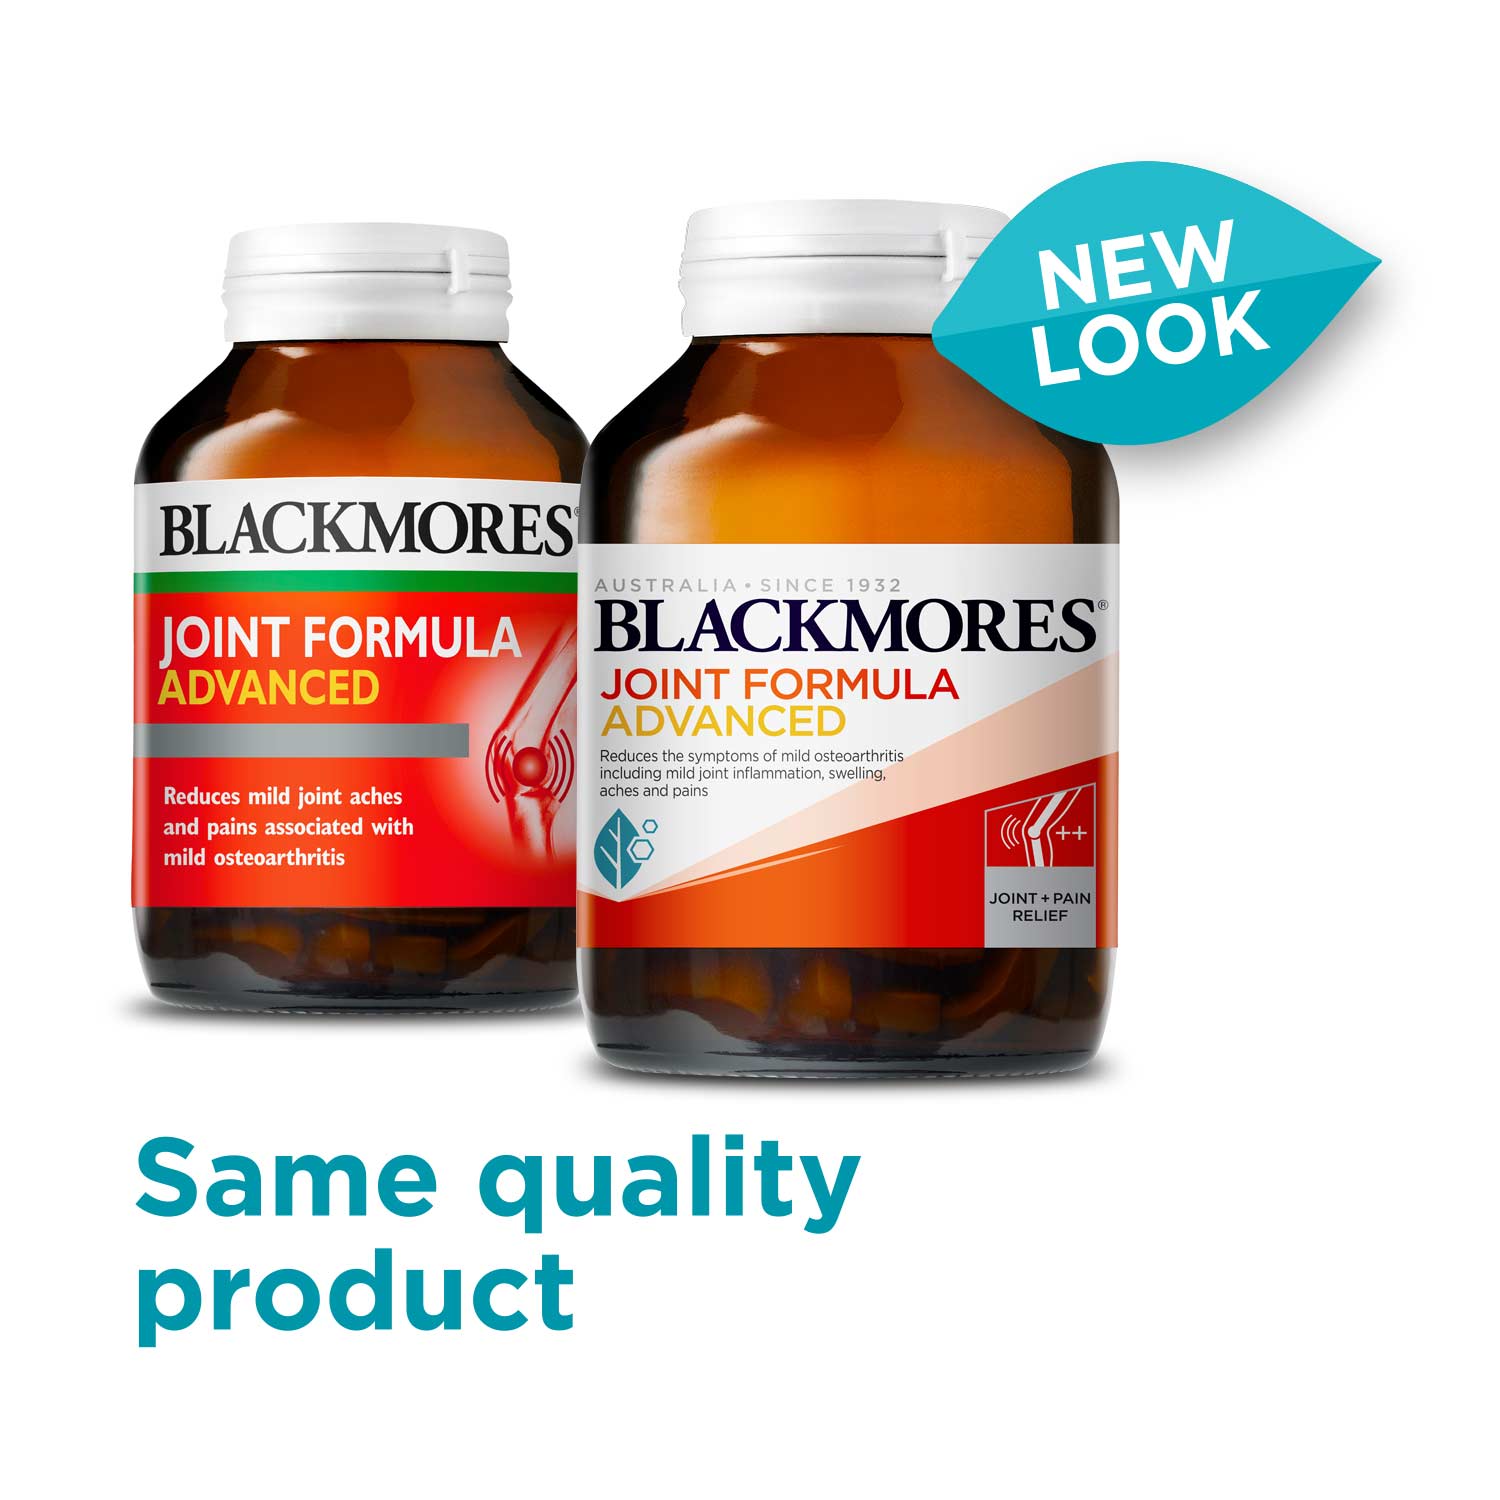 Blackmores Joint Formula Advanced new look label